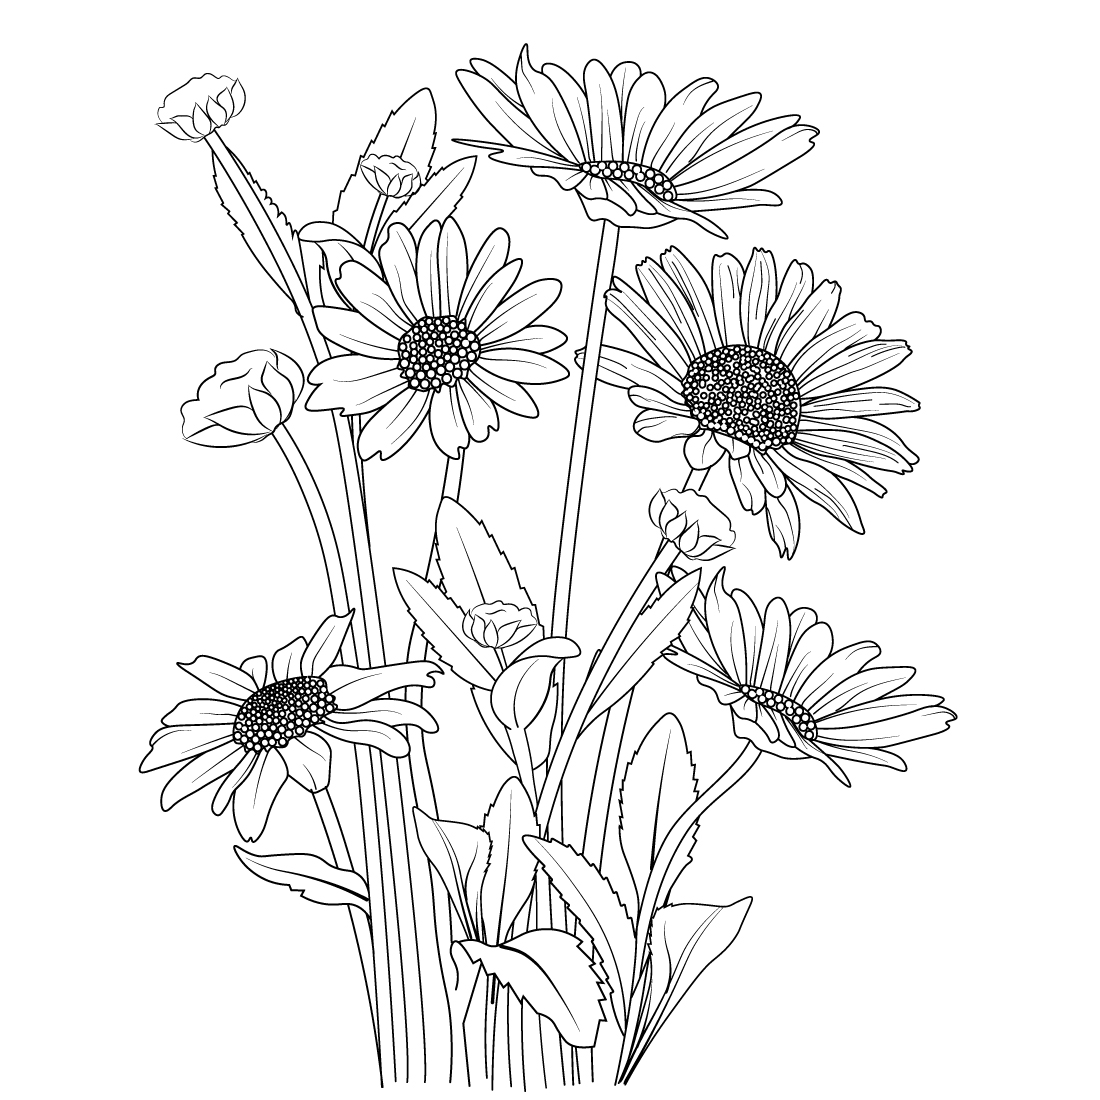 Outline Daisy Flower Drawing And